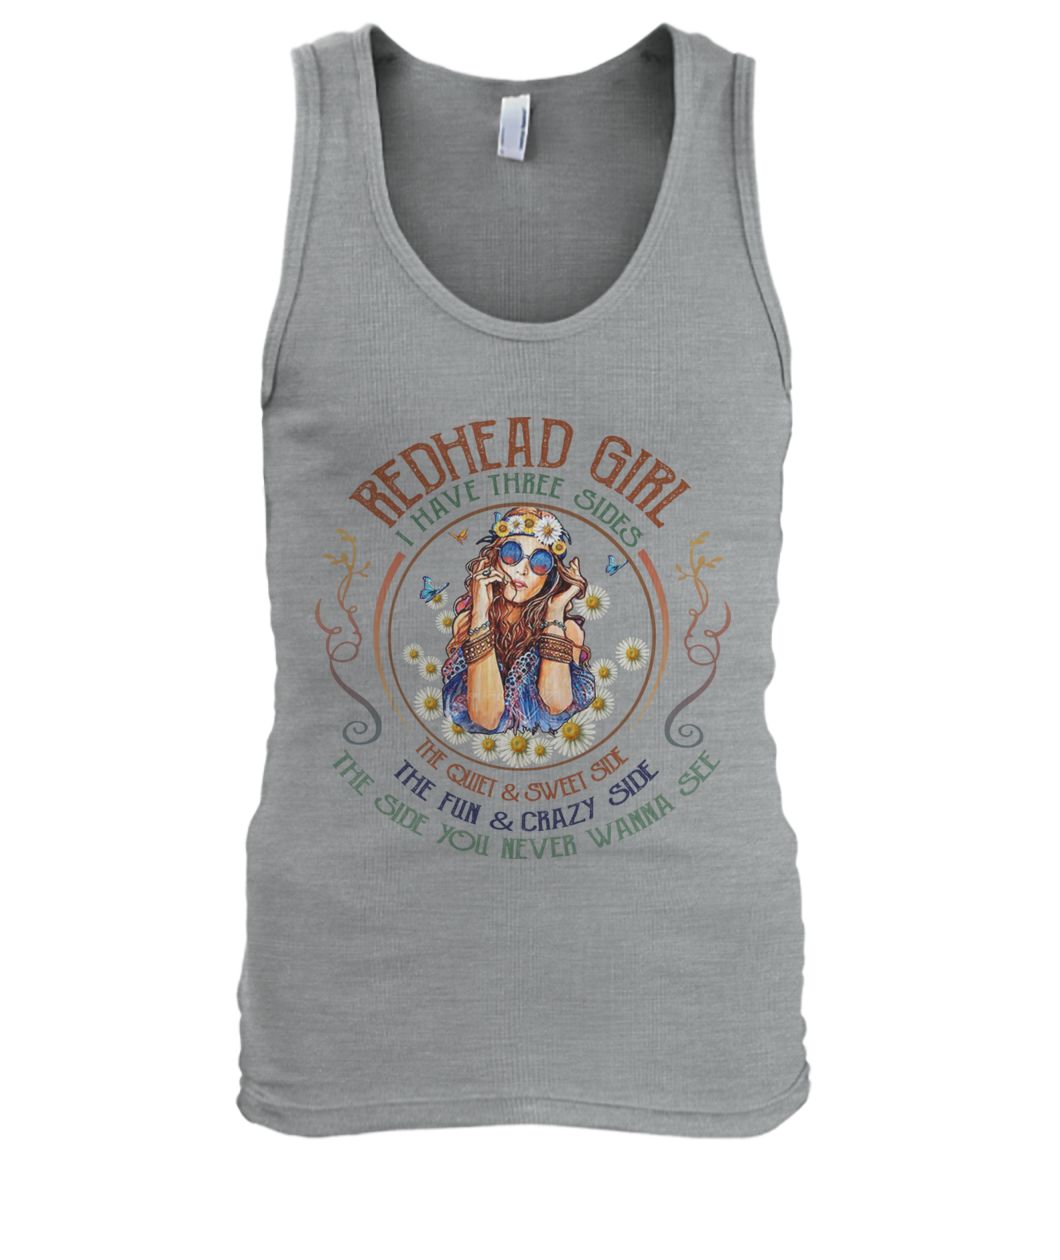 Redhead girl I have three sides the quiet and sweet side men's tank top